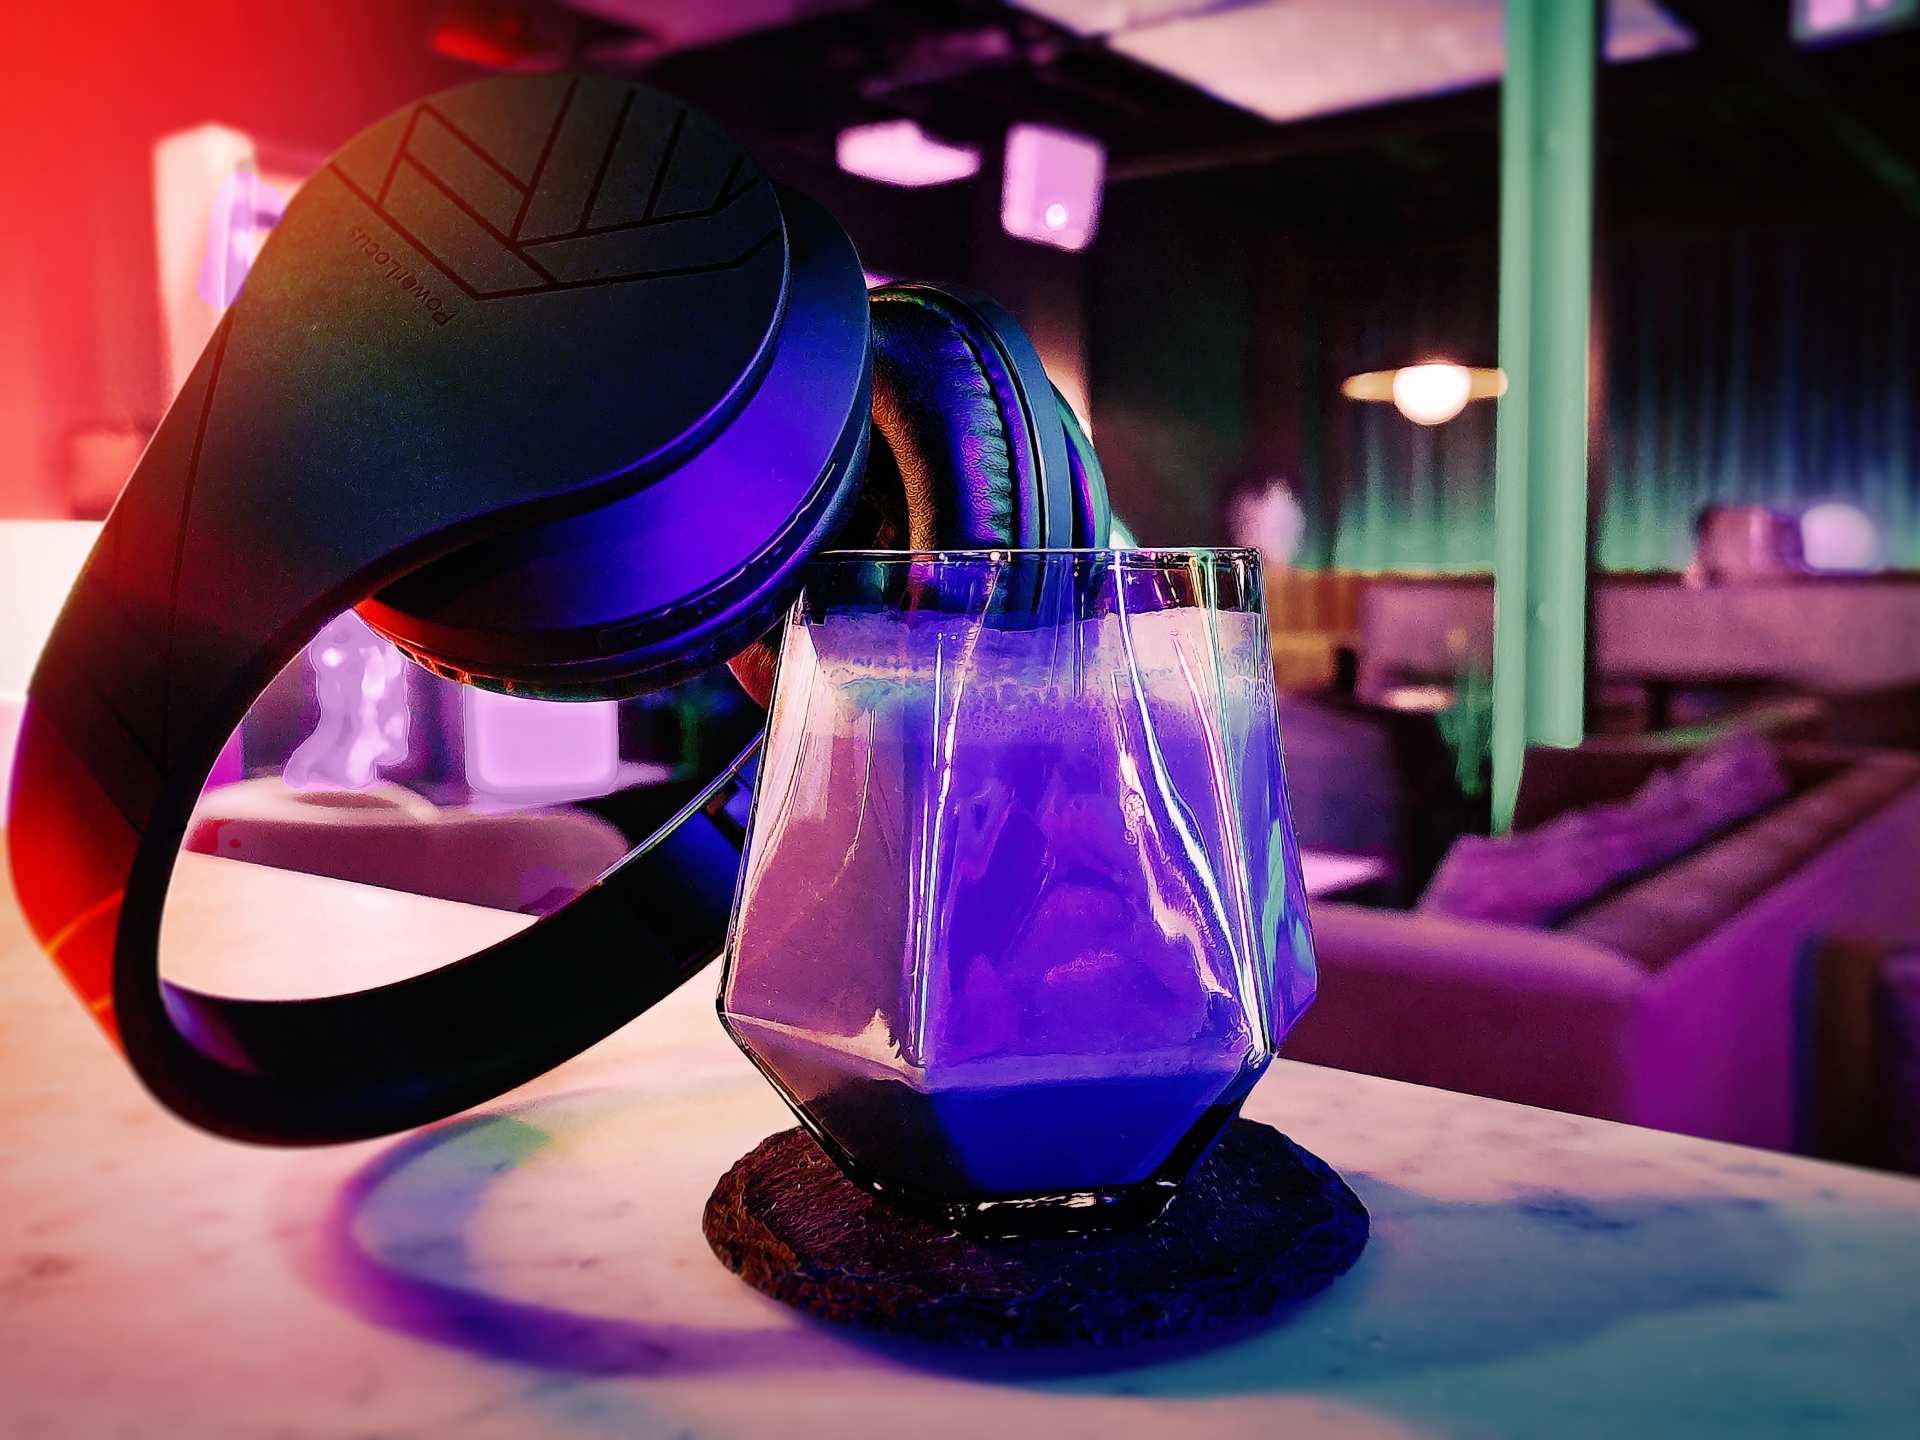 Offworld bar | The Black Hole cocktail with noise cancelling headphones at Offworld bar